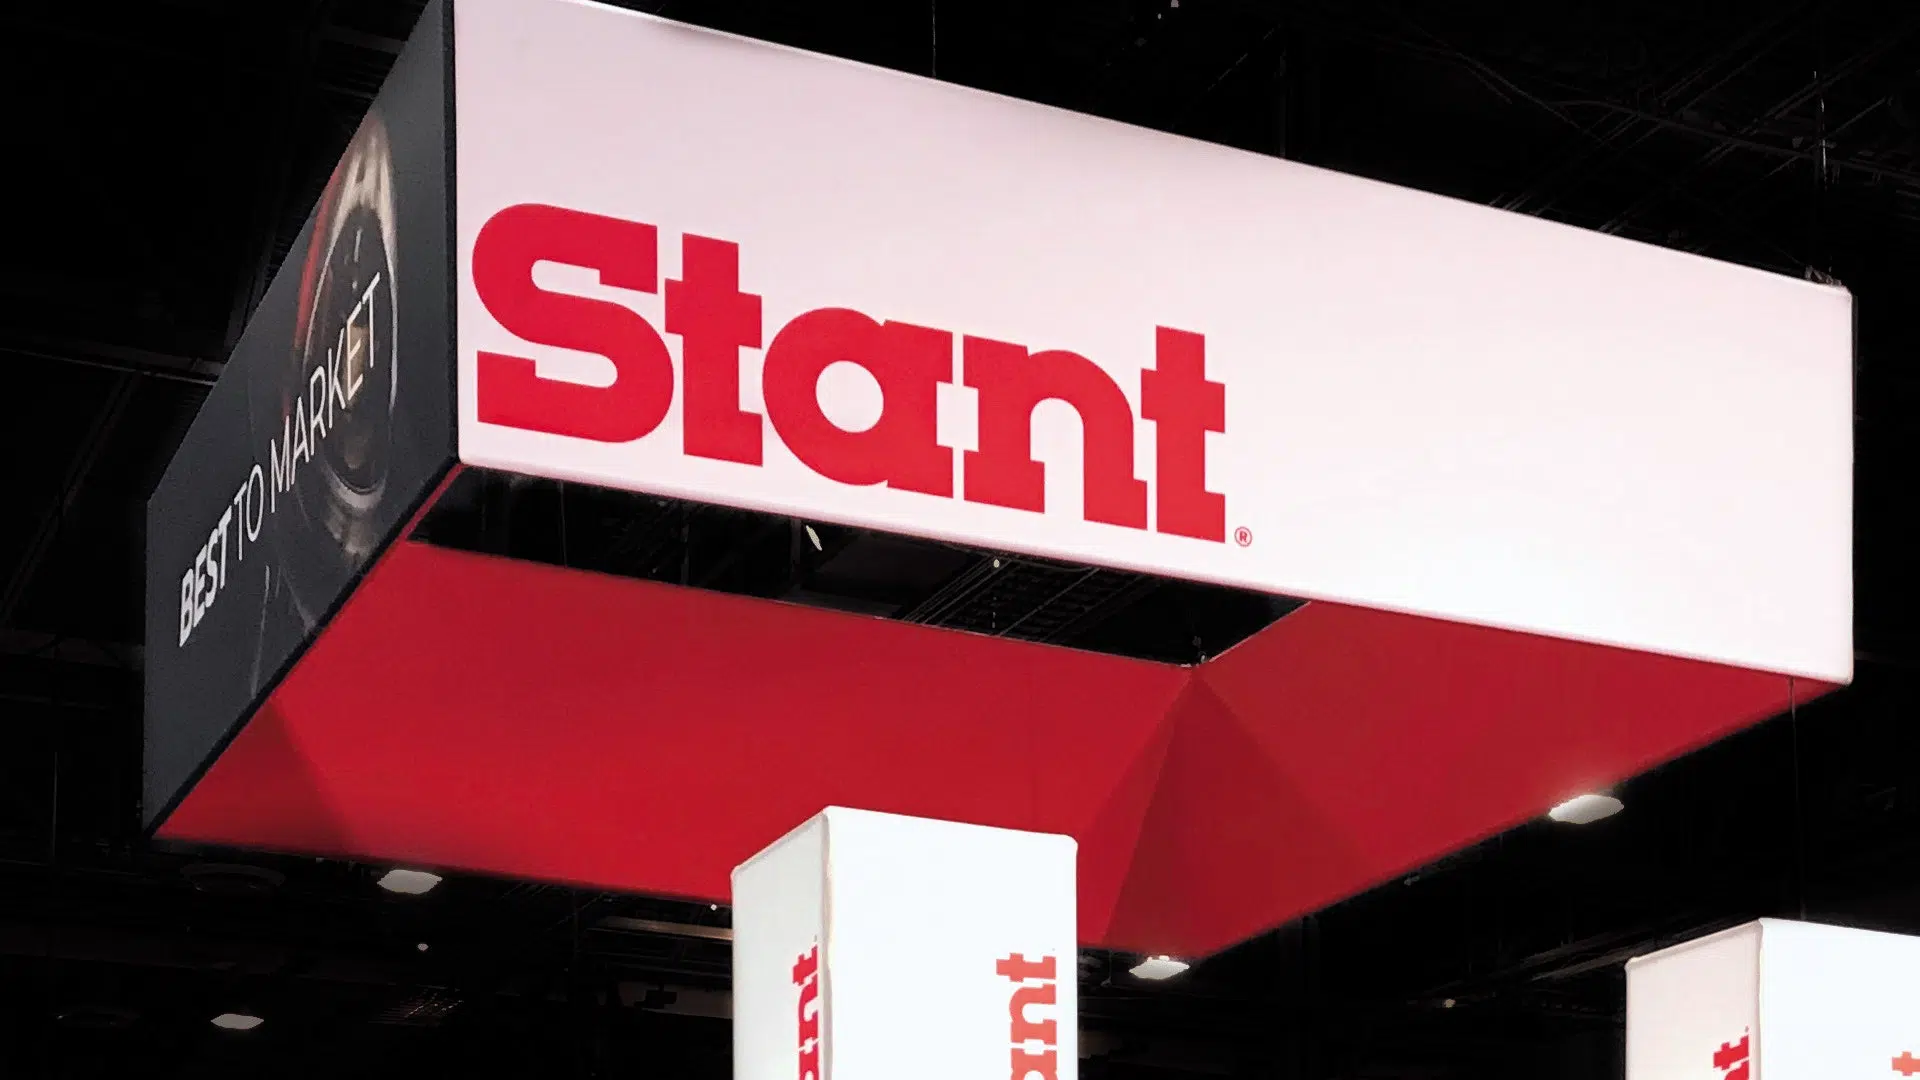 Stant Trade Show Booth Details